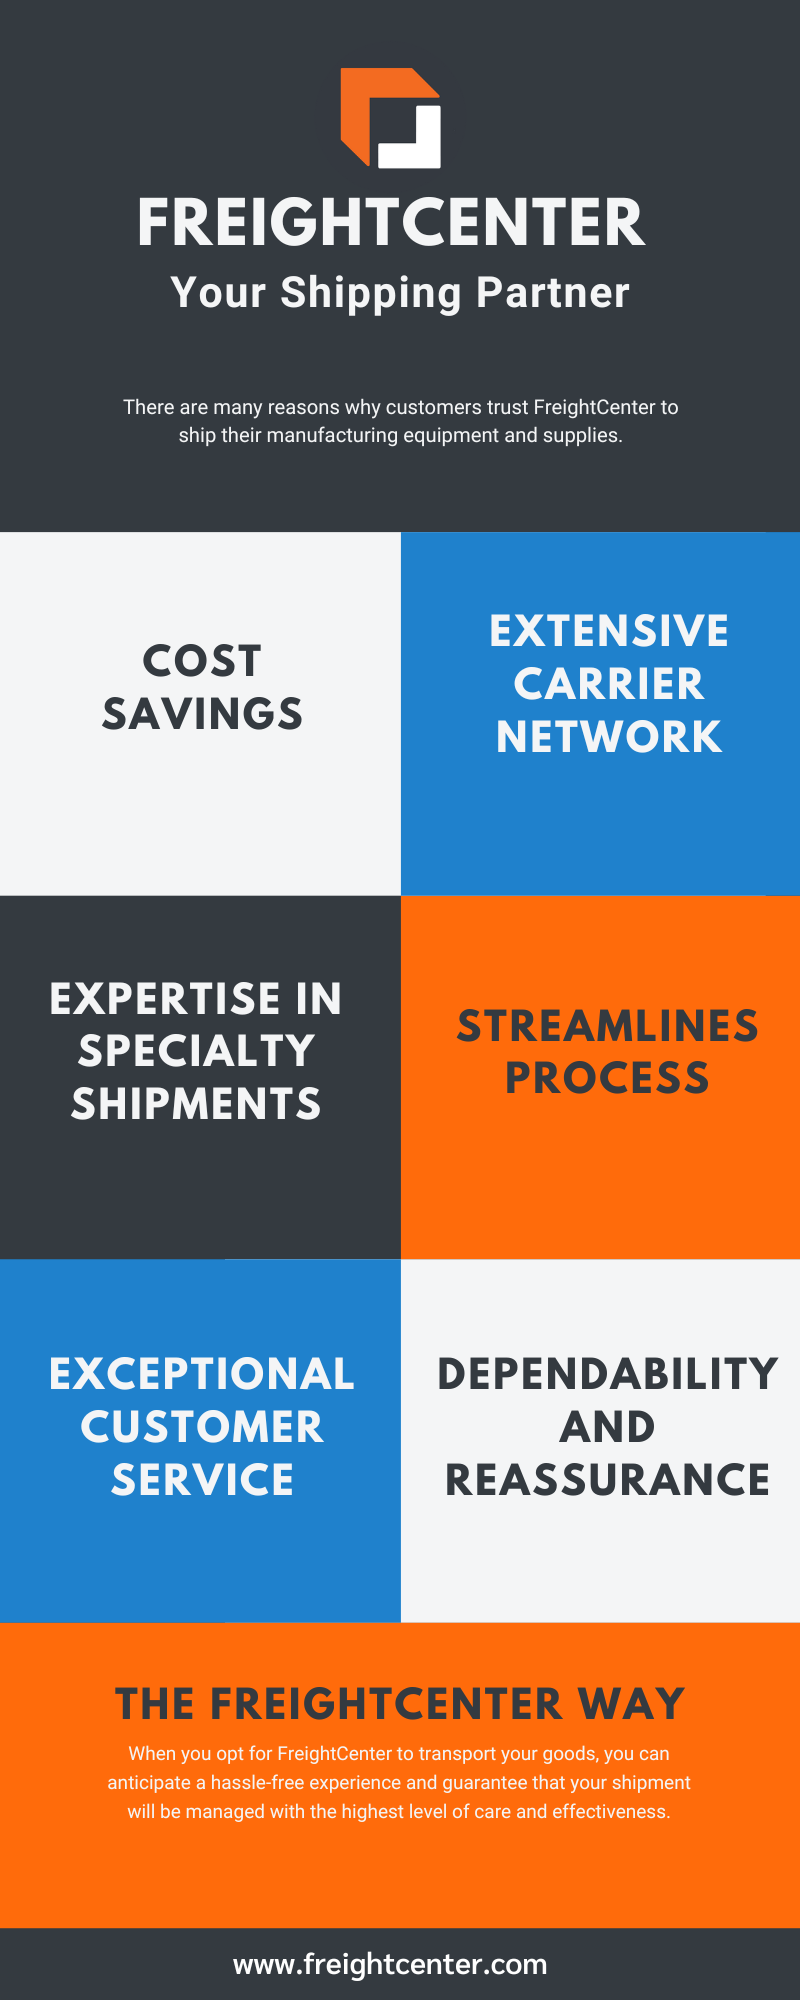 FC Shipping Partner Infographic detailing 6 reasons to partner with FreightCenter